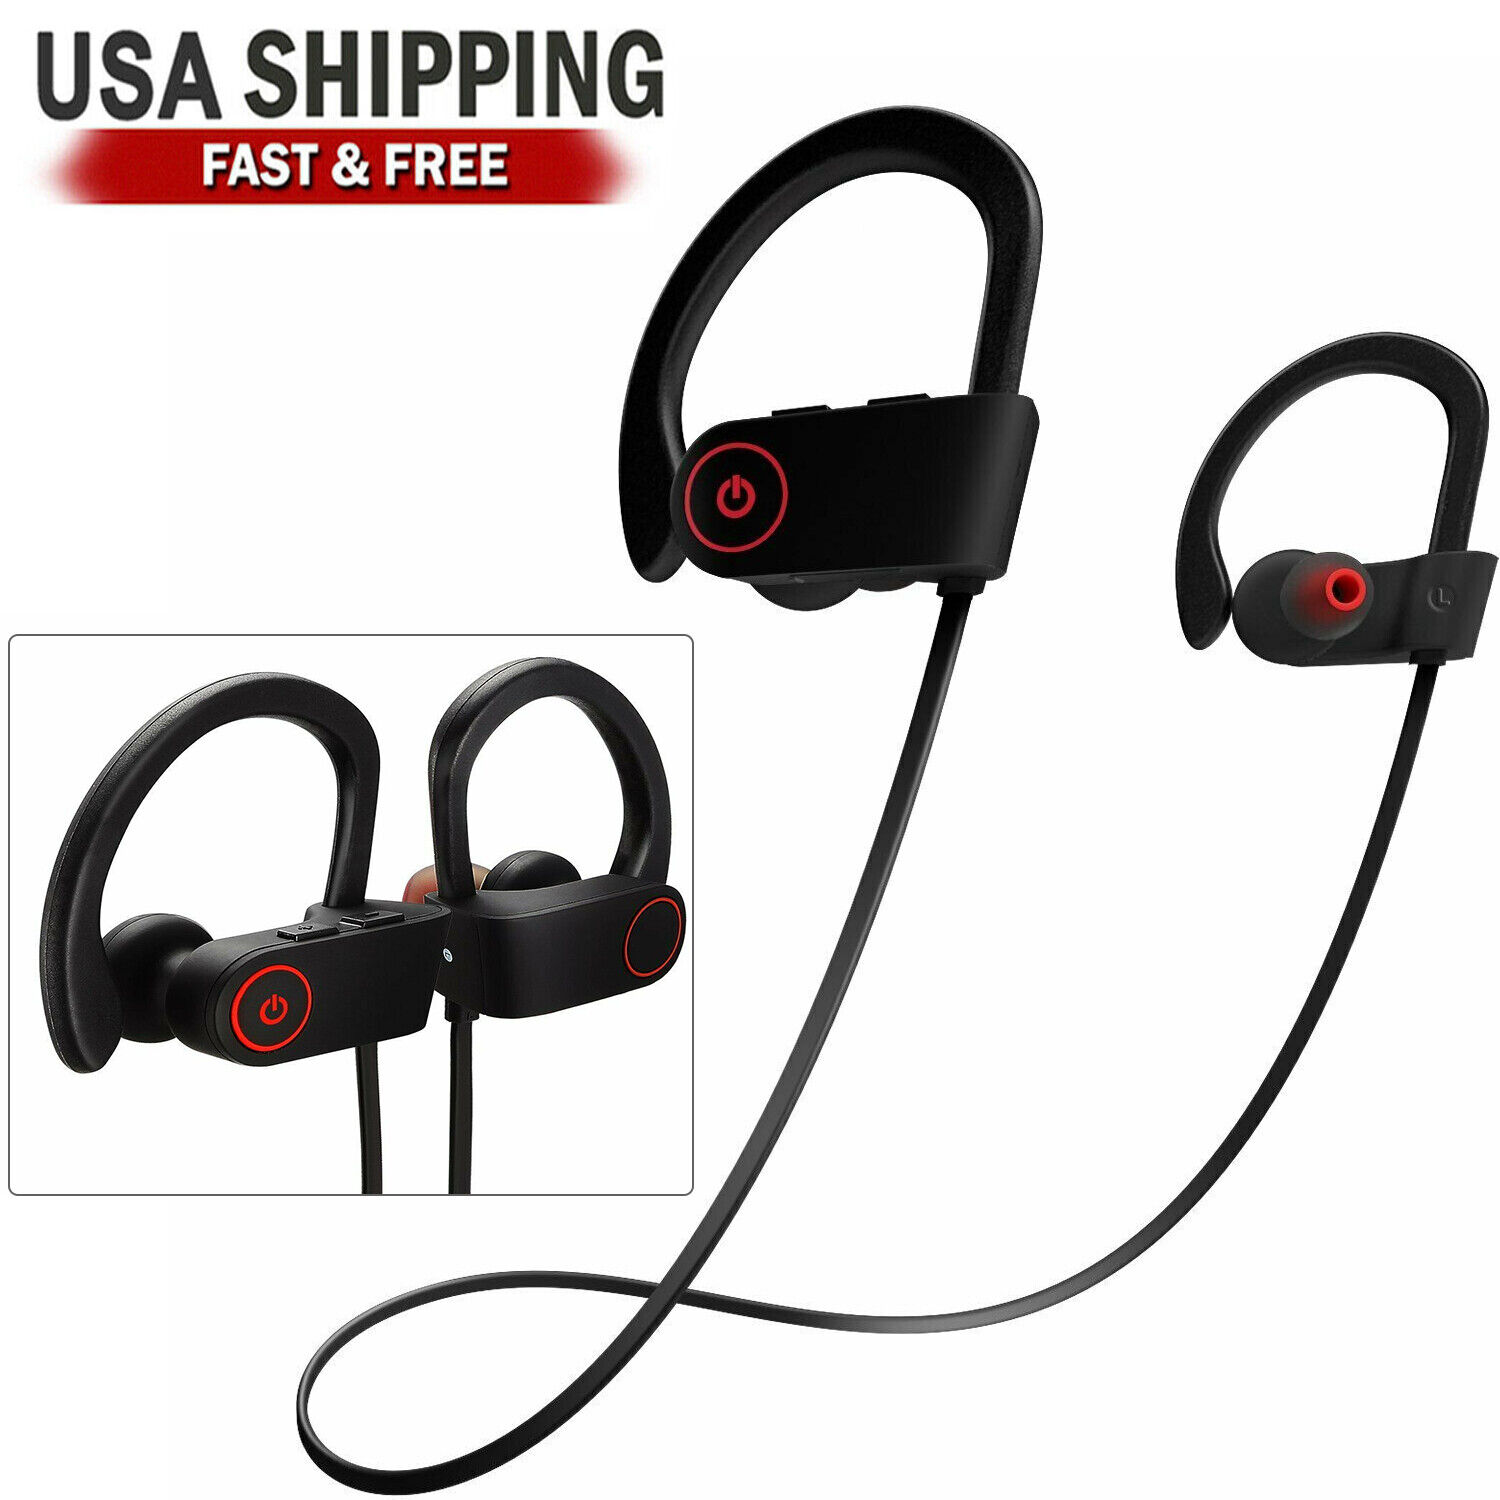 Bluetooth 5.0 Waterproof Earbuds for Sports